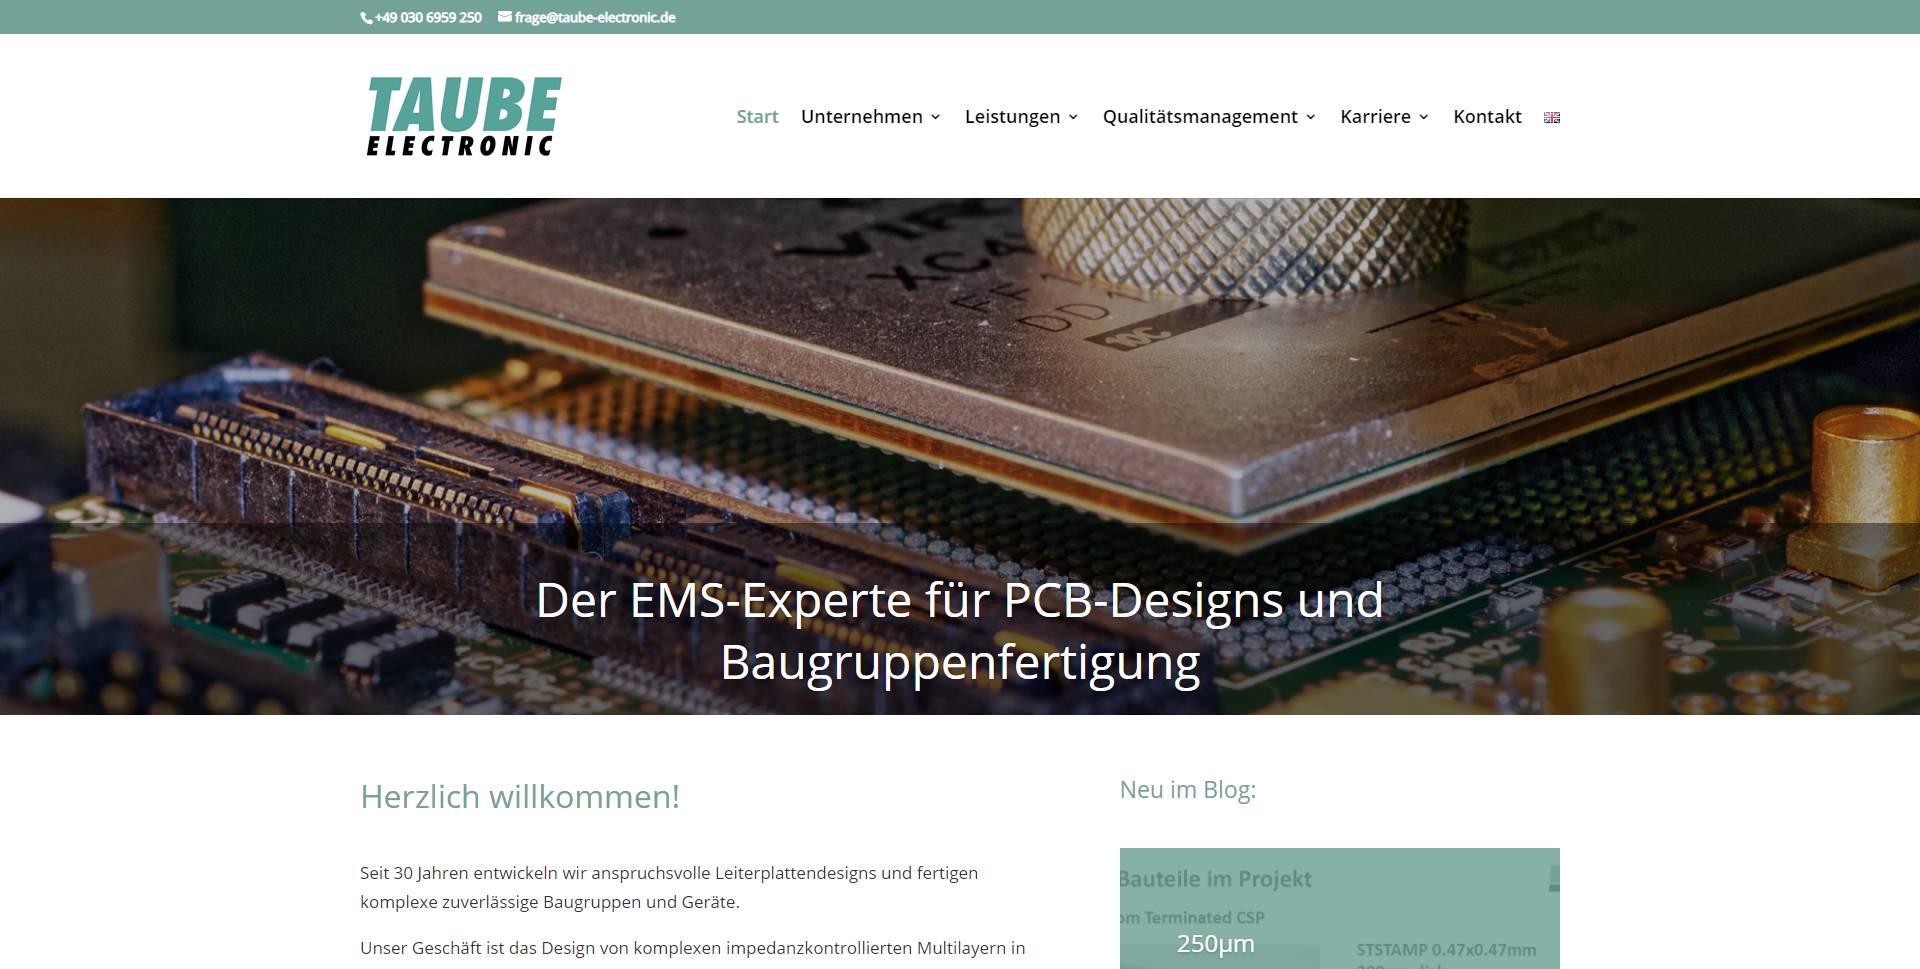 Taube Electronic: Website-Relaunch